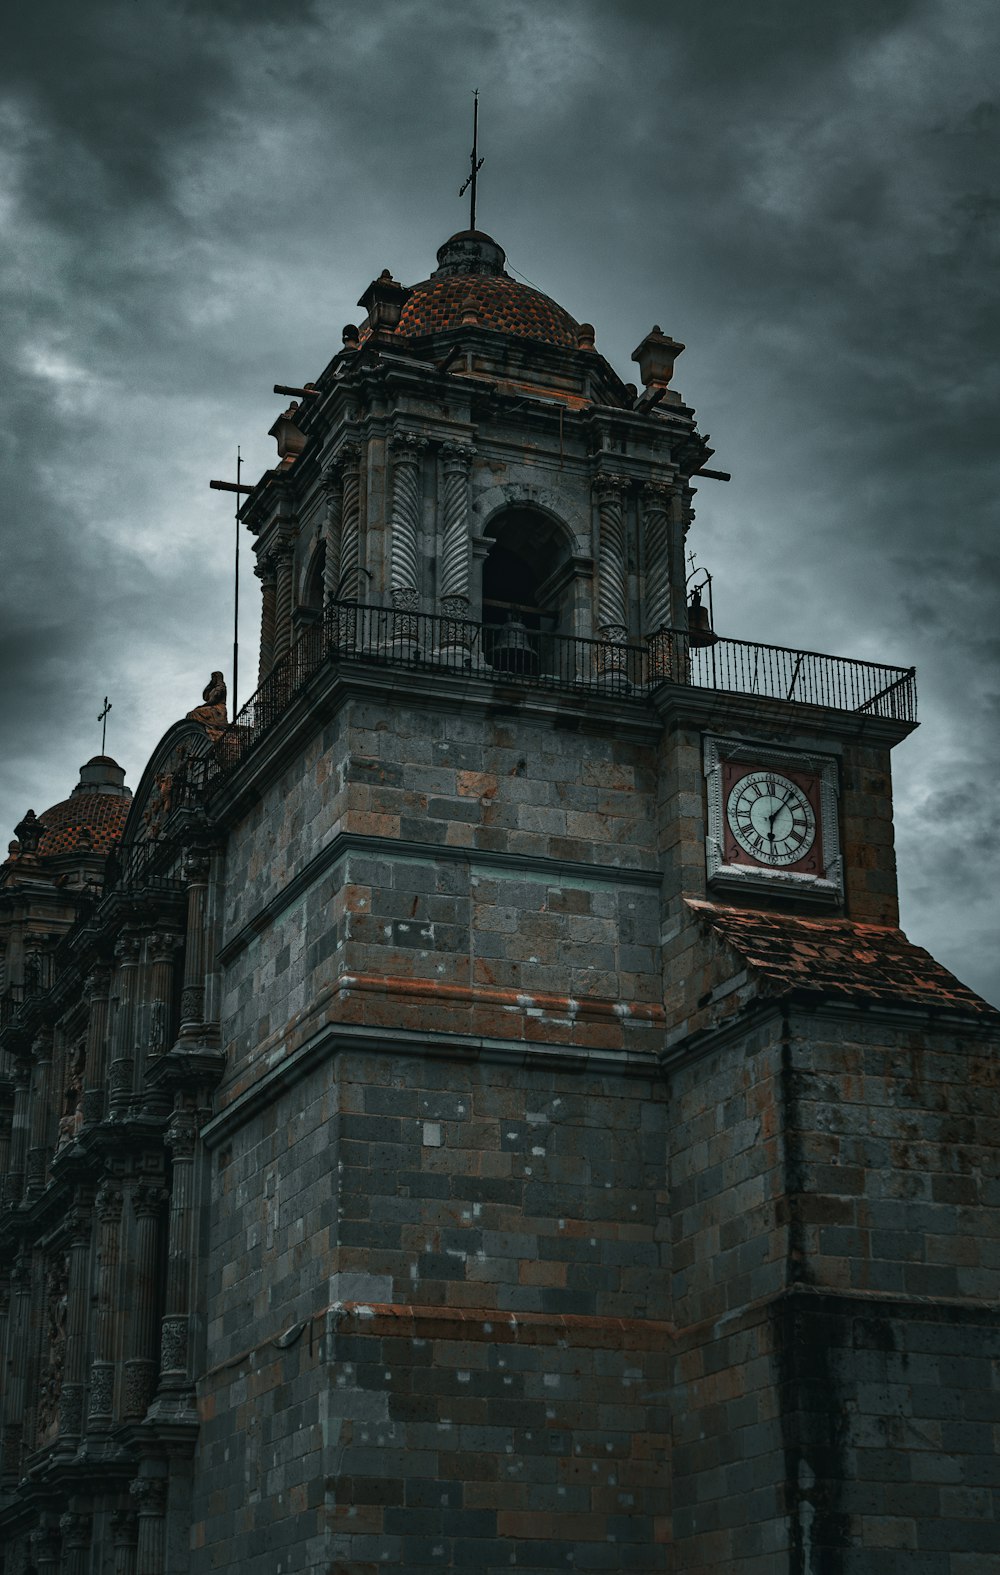 a clock tower with a cloudy sky in the background